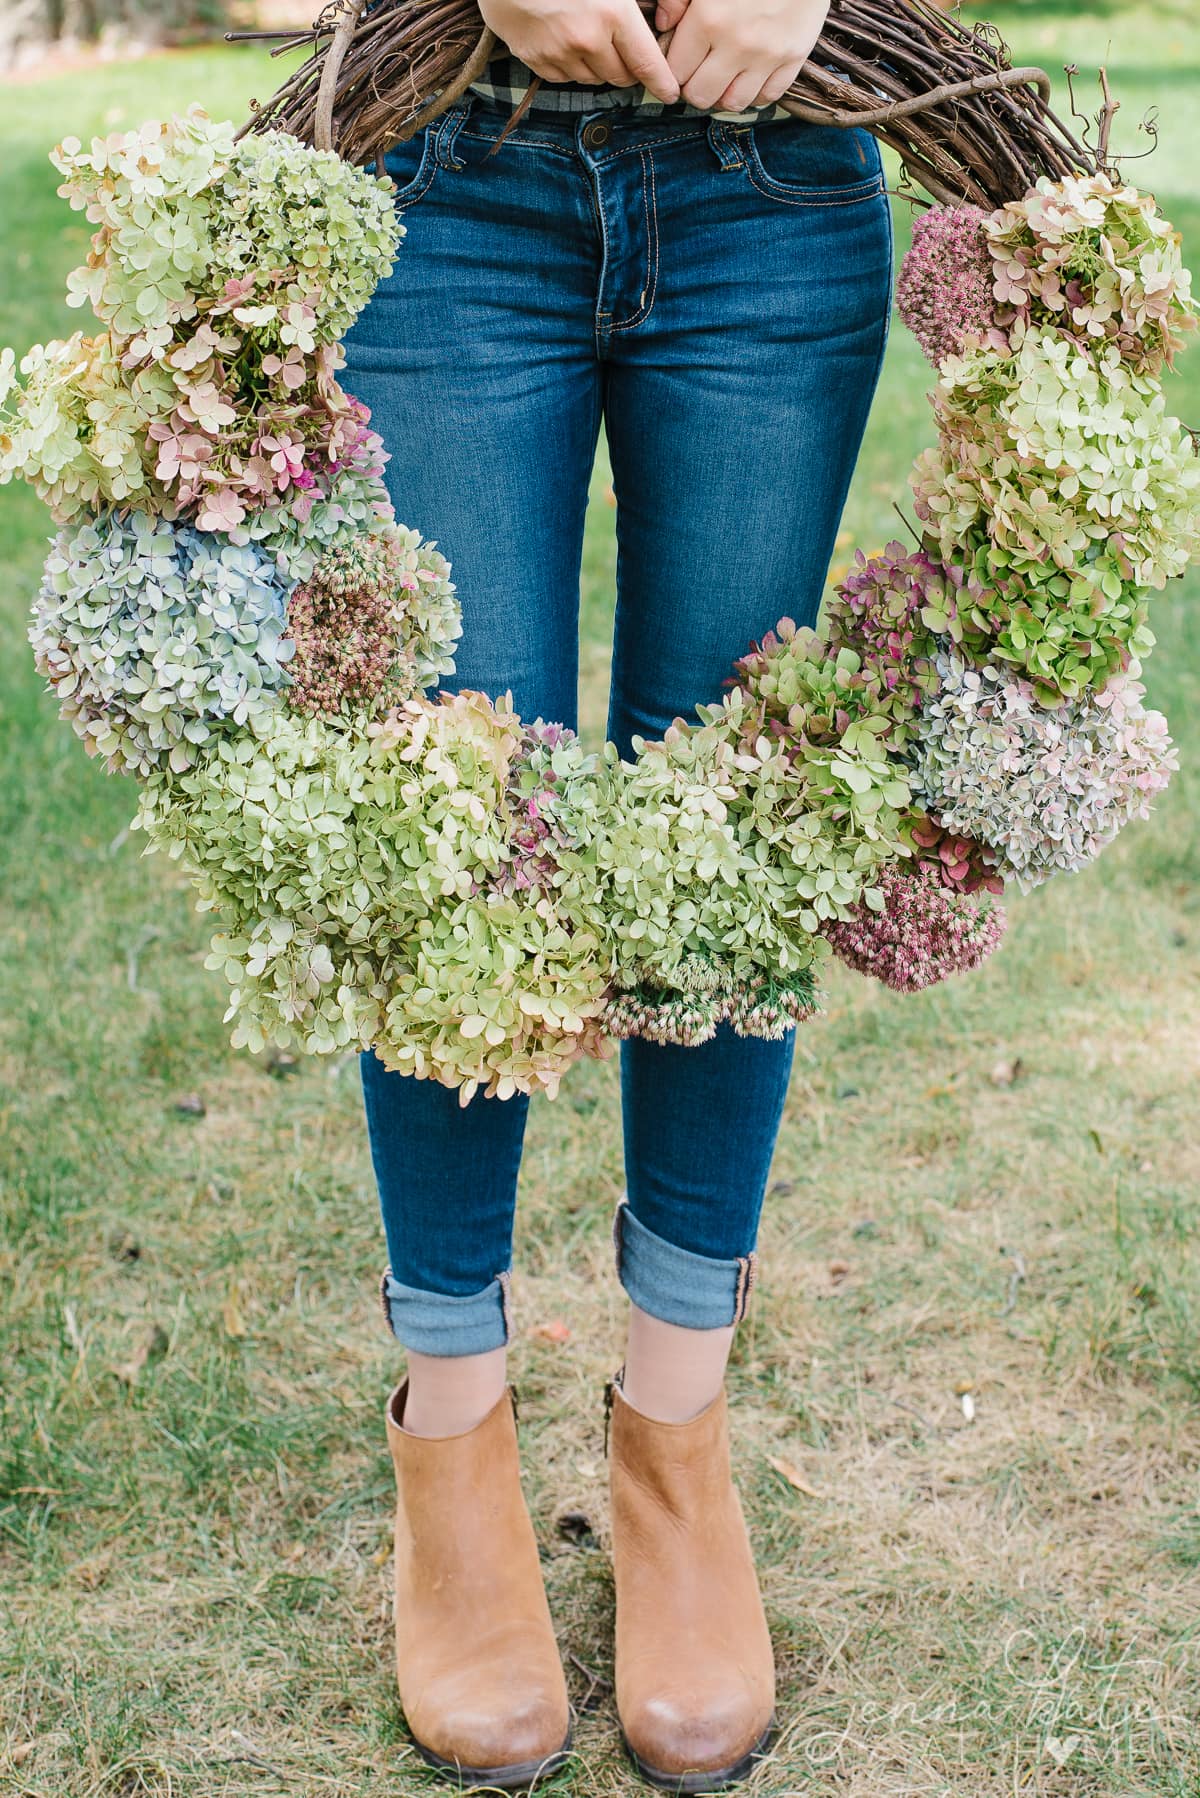 How to Make a DIY Hydrangea Wreath for Fall